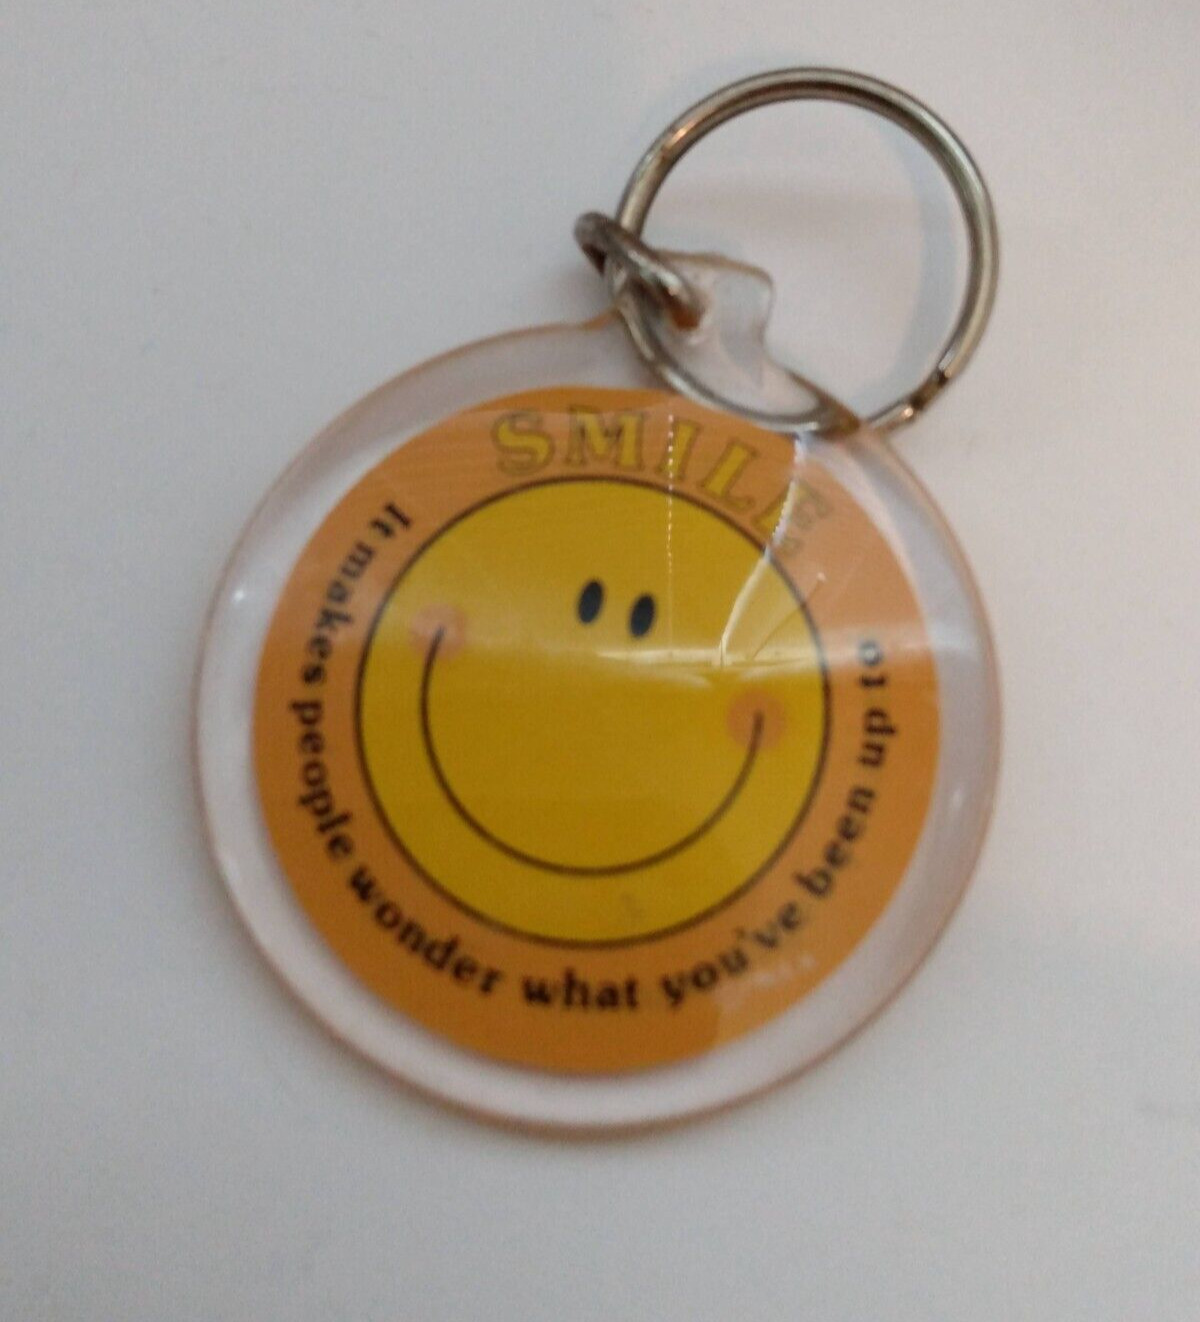 Smile...It Makes People Wonder What You\'ve Been Up To Keyring Humor